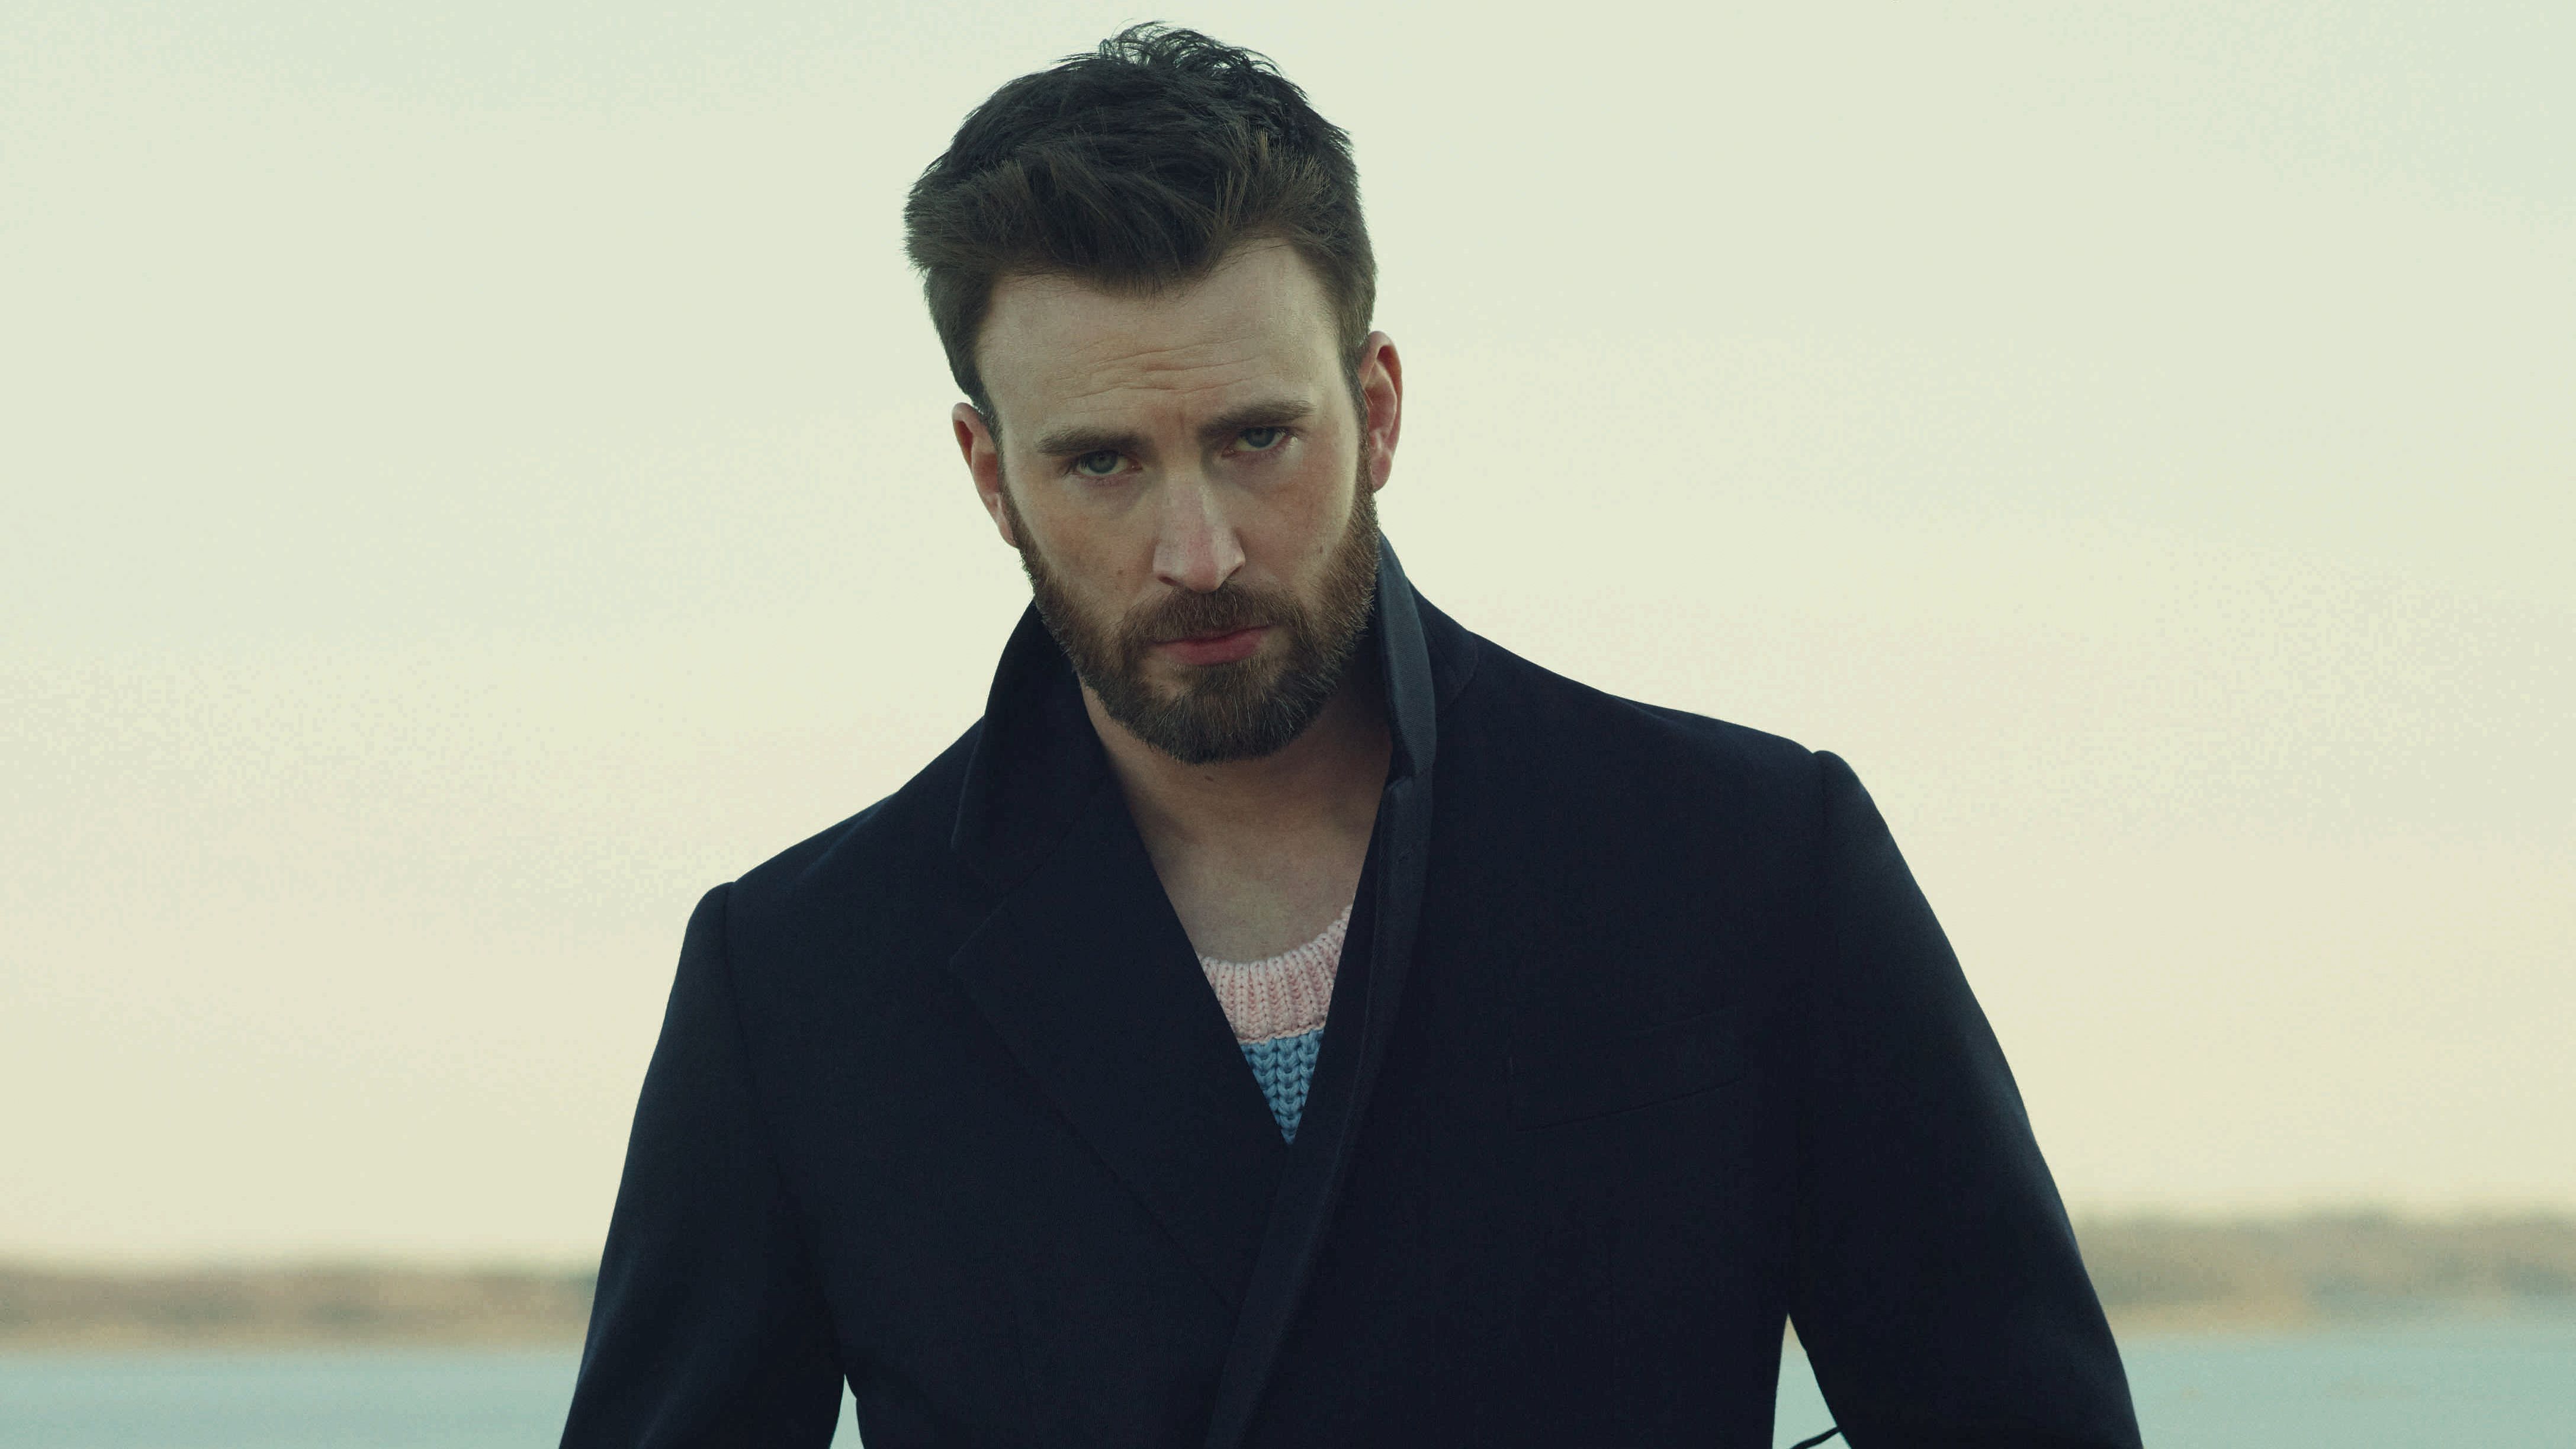 Chris Evans For Esquire HD Celebrities, 4k Wallpaper, Image, Background, Photo and Picture